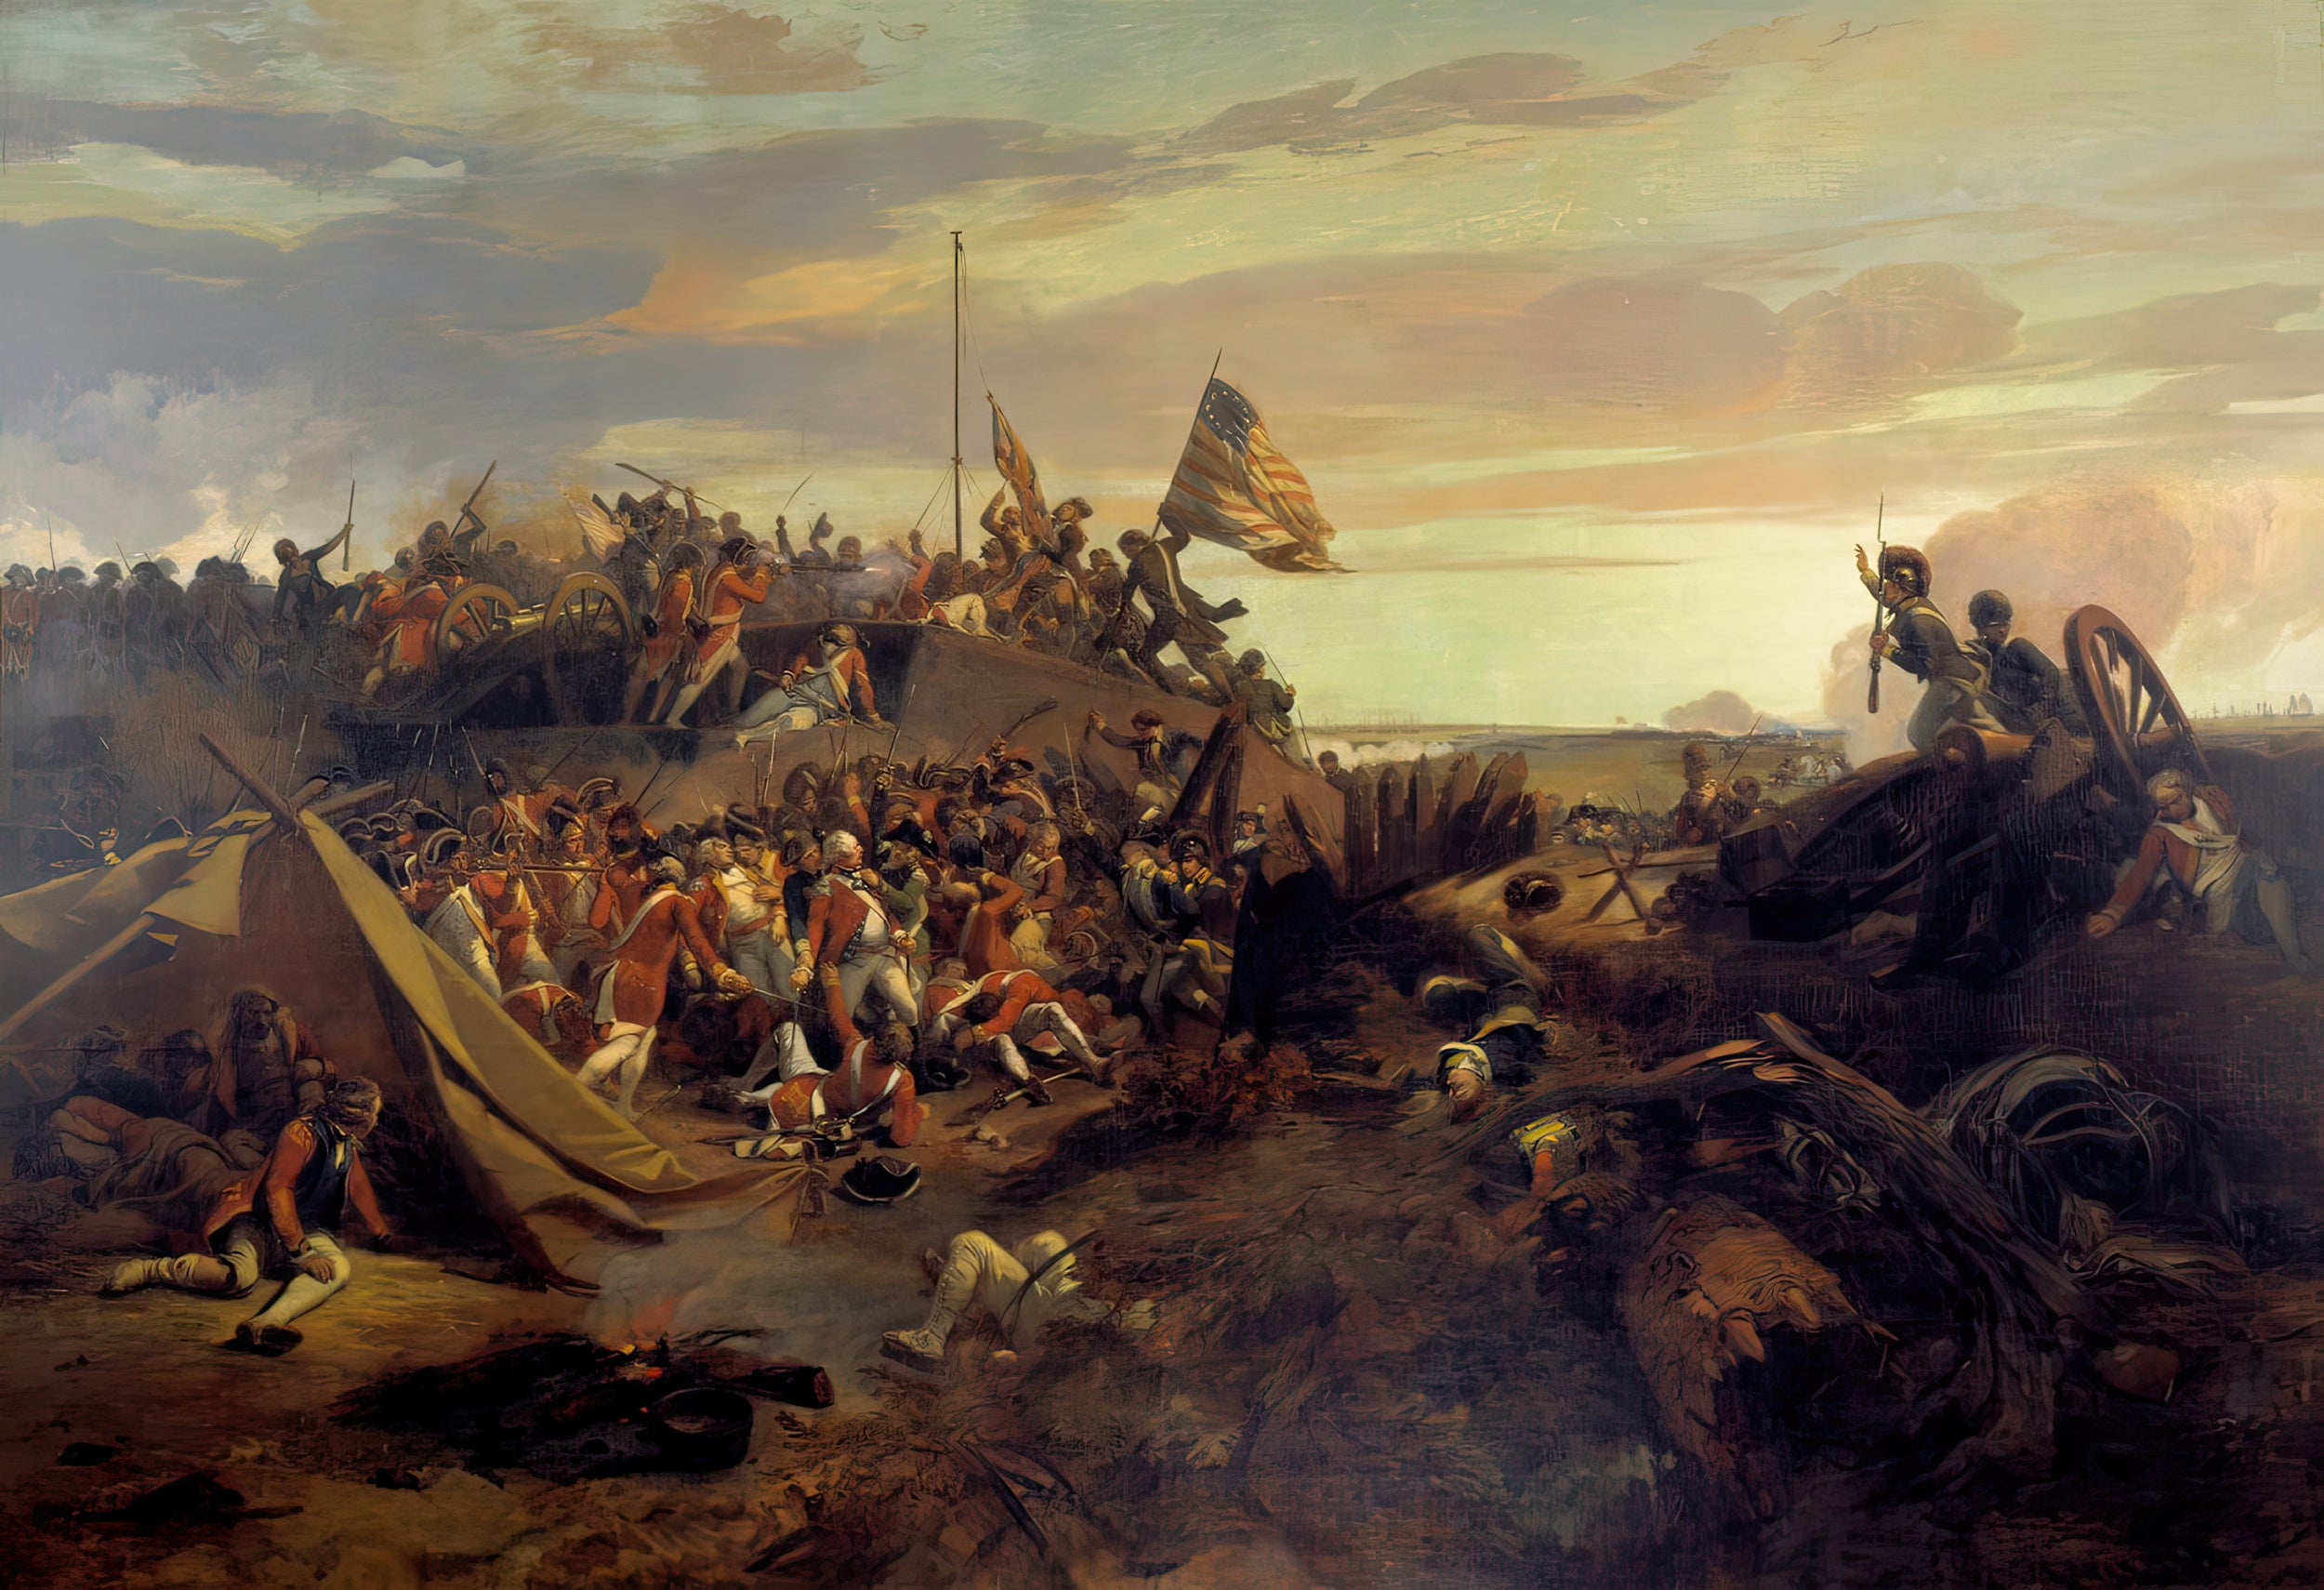 The Siege of Yorktown - Painting depicting the battle during the American Revolutionary War